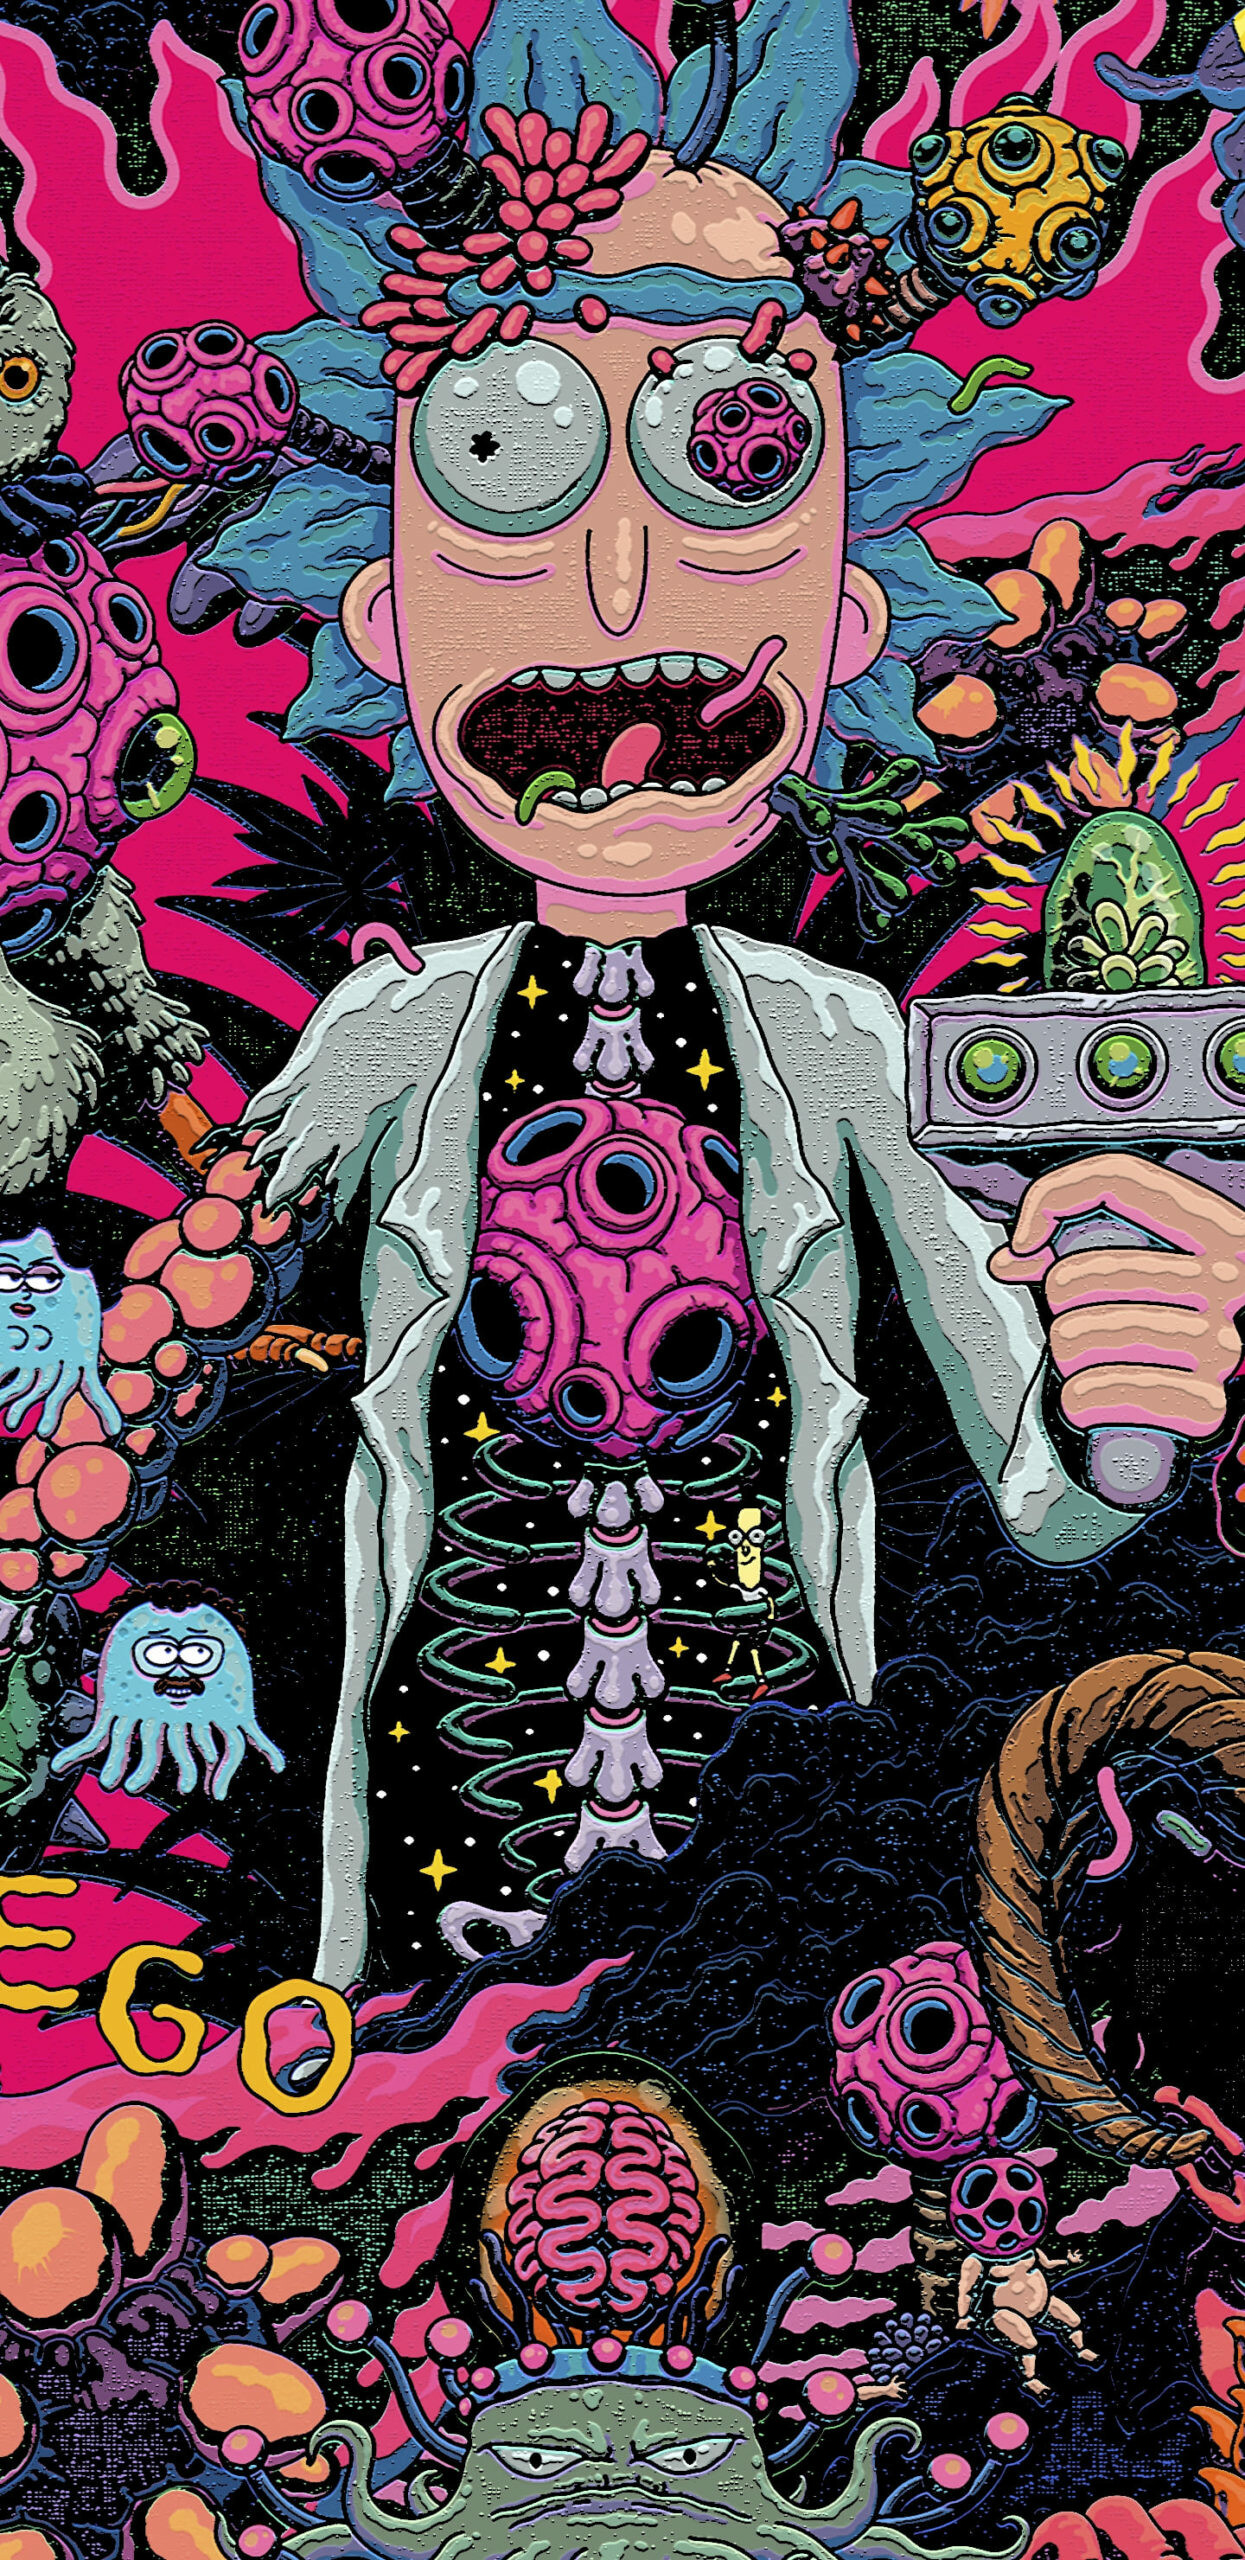 Rick and Morty: Season 5, Sanchez C-137 is a sociopathic mad scientist. 1250x2560 HD Background.